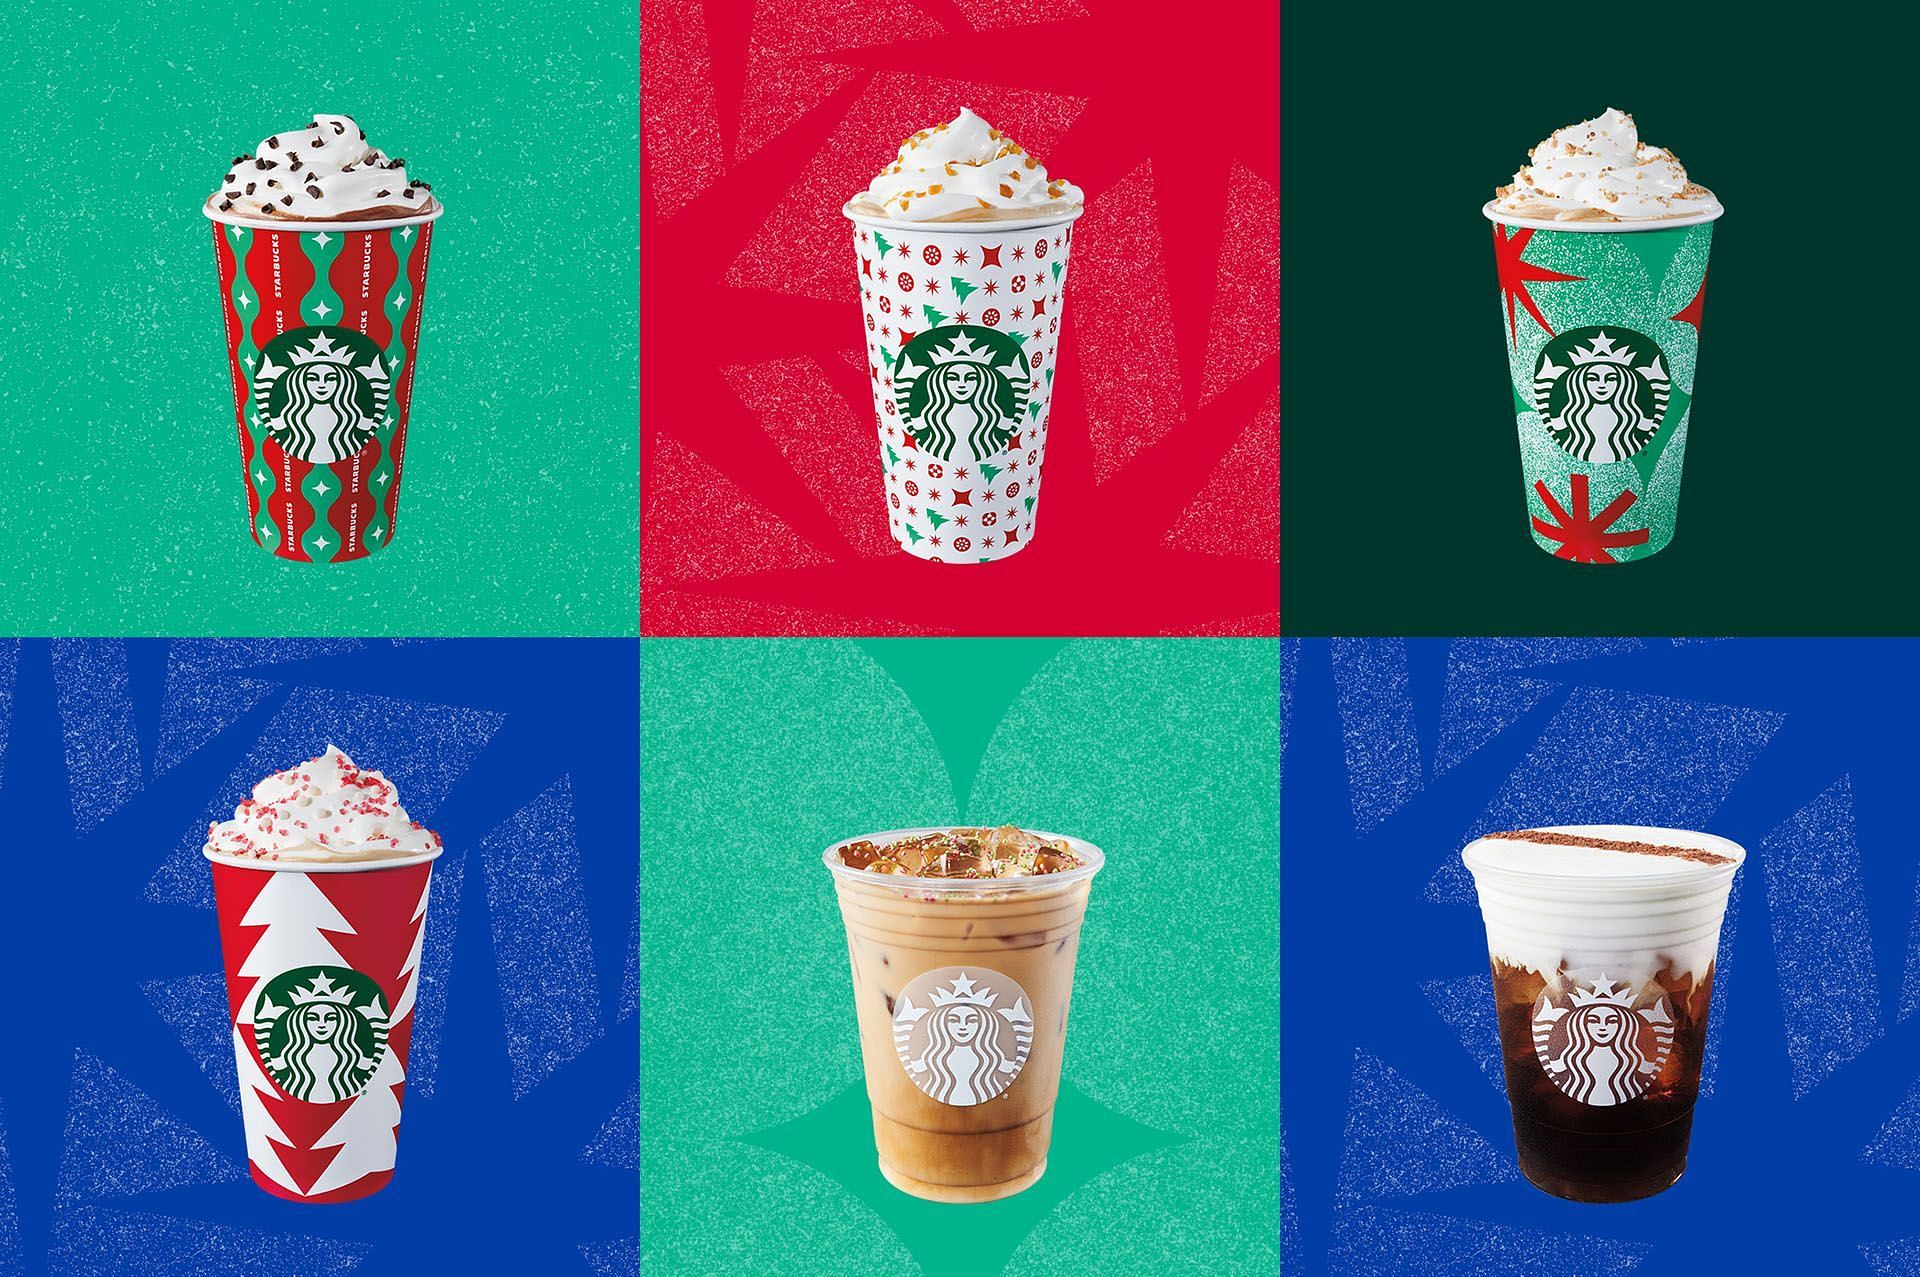 Red cup season starts today! Starbucks rolls out holiday cups